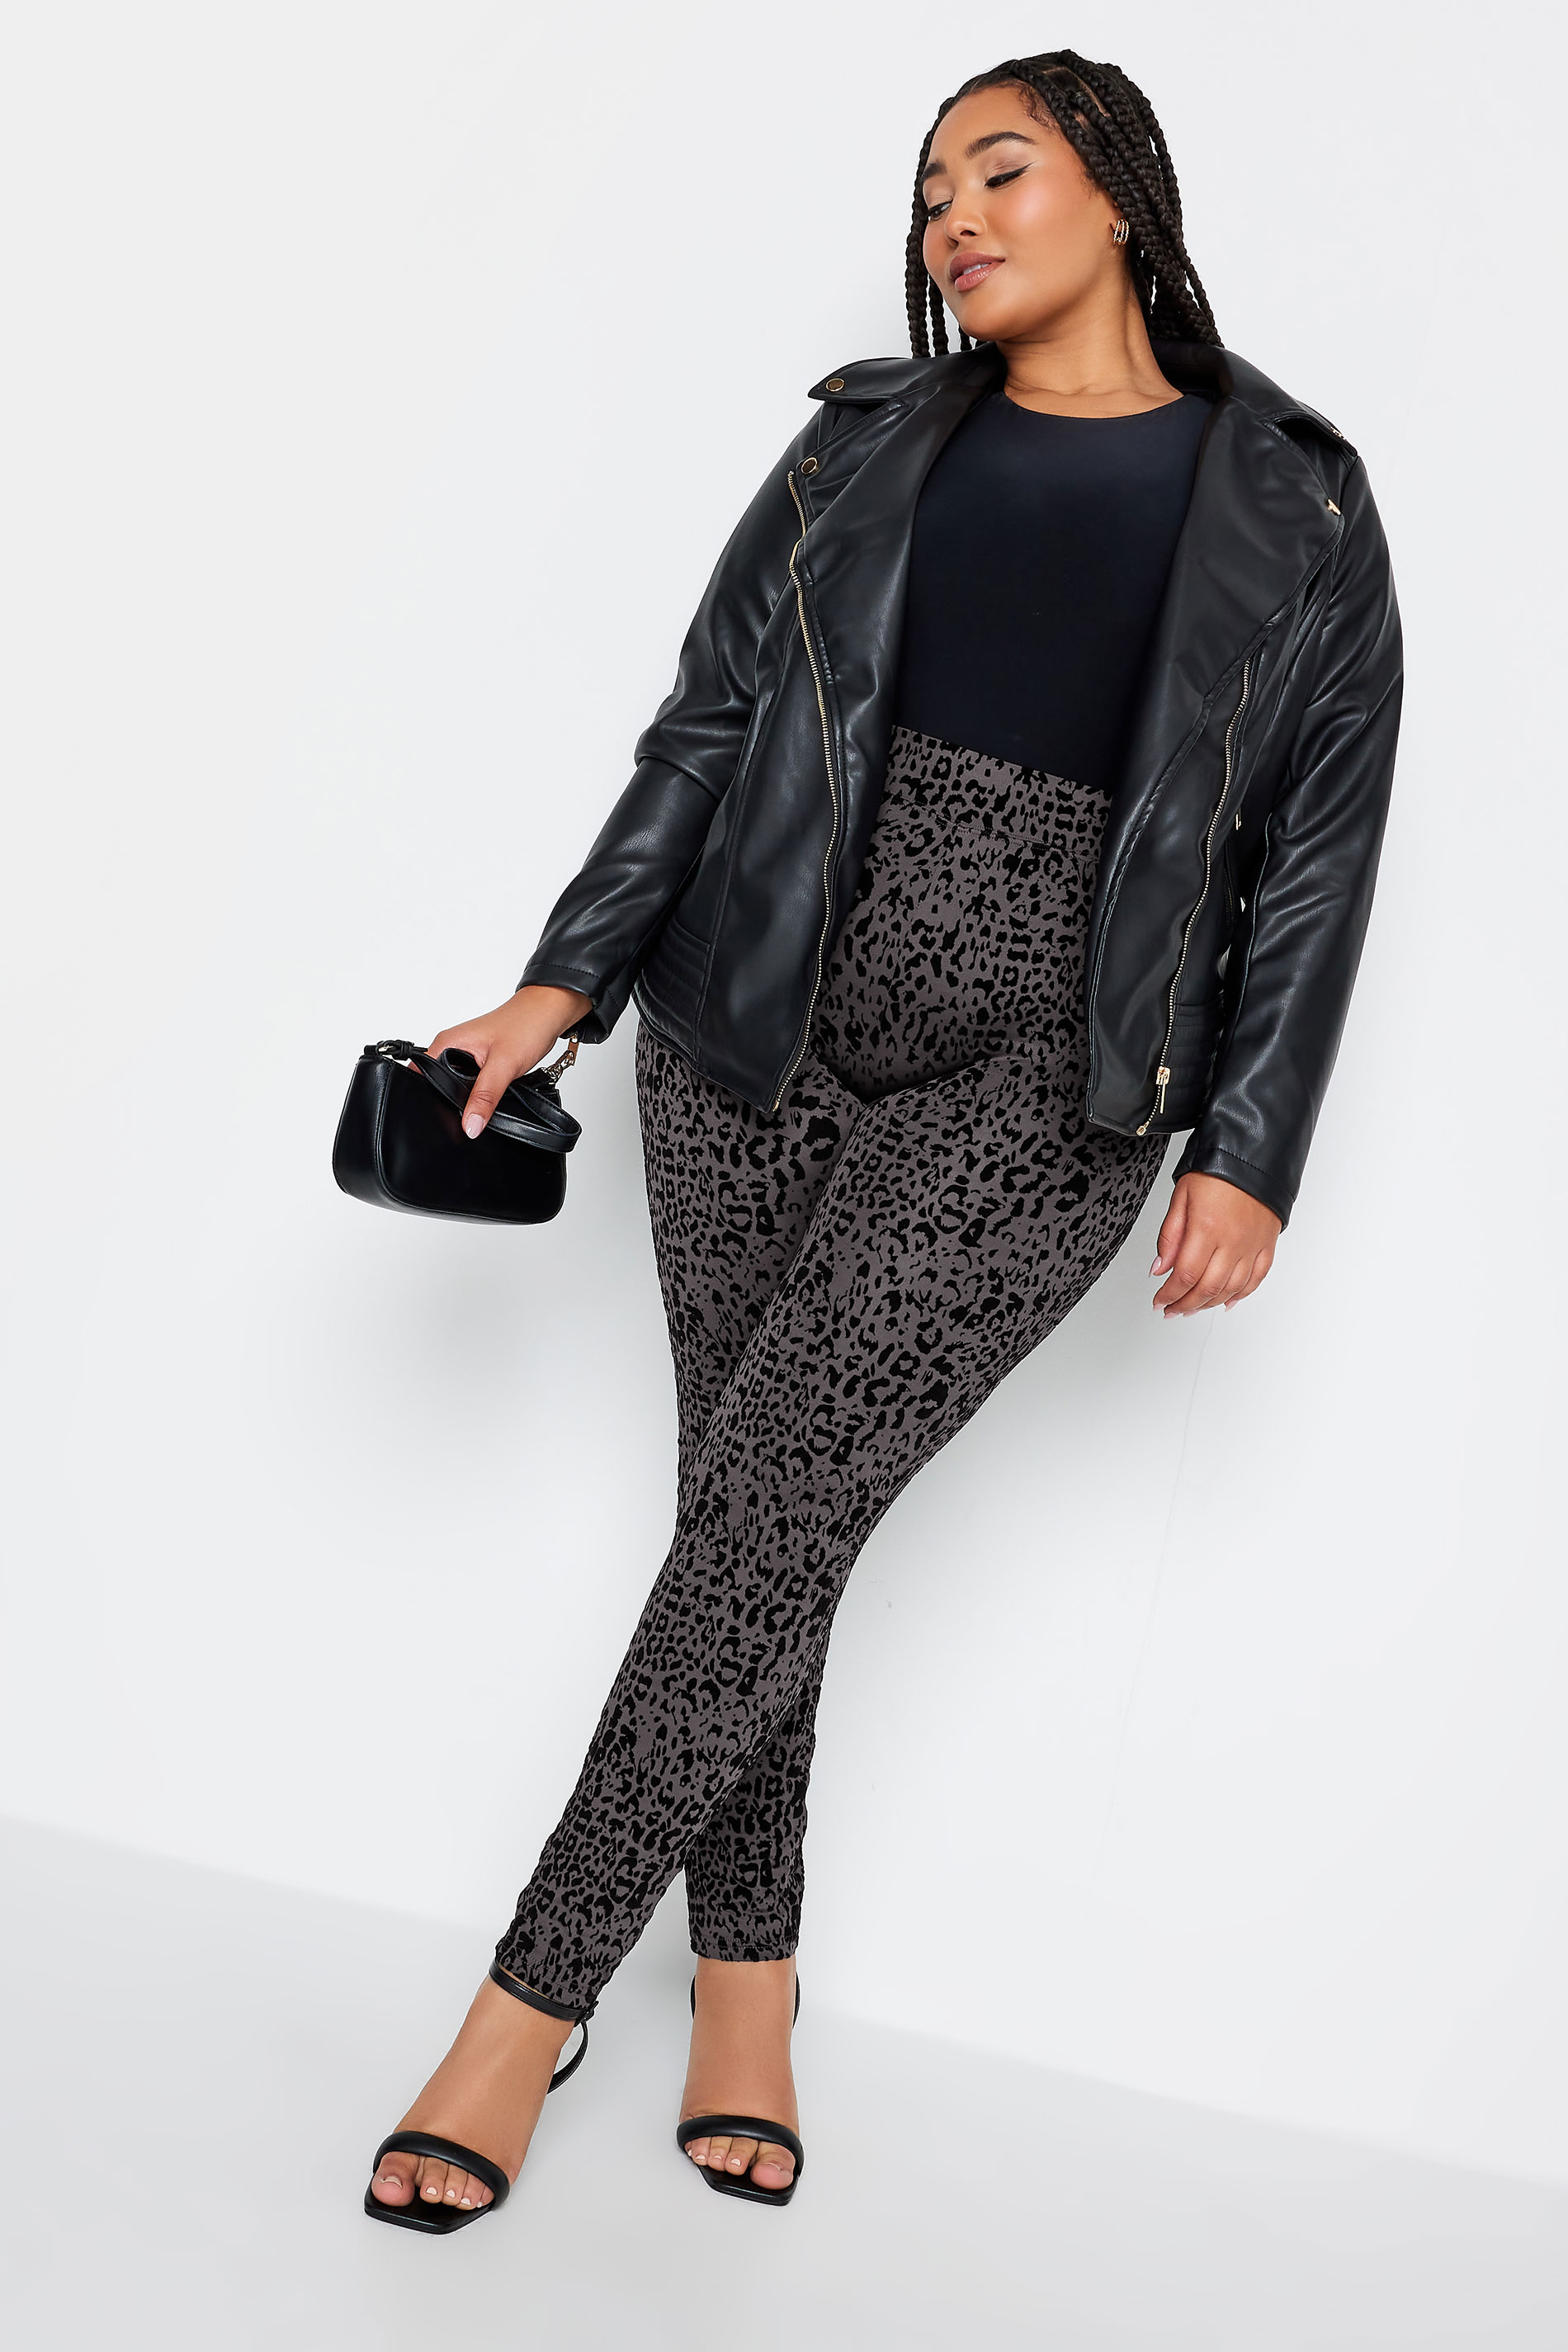 The Blakely High Waist Leopard Flares | Cheetah print leggings, Outfits  with leggings, Printed leggings outfit